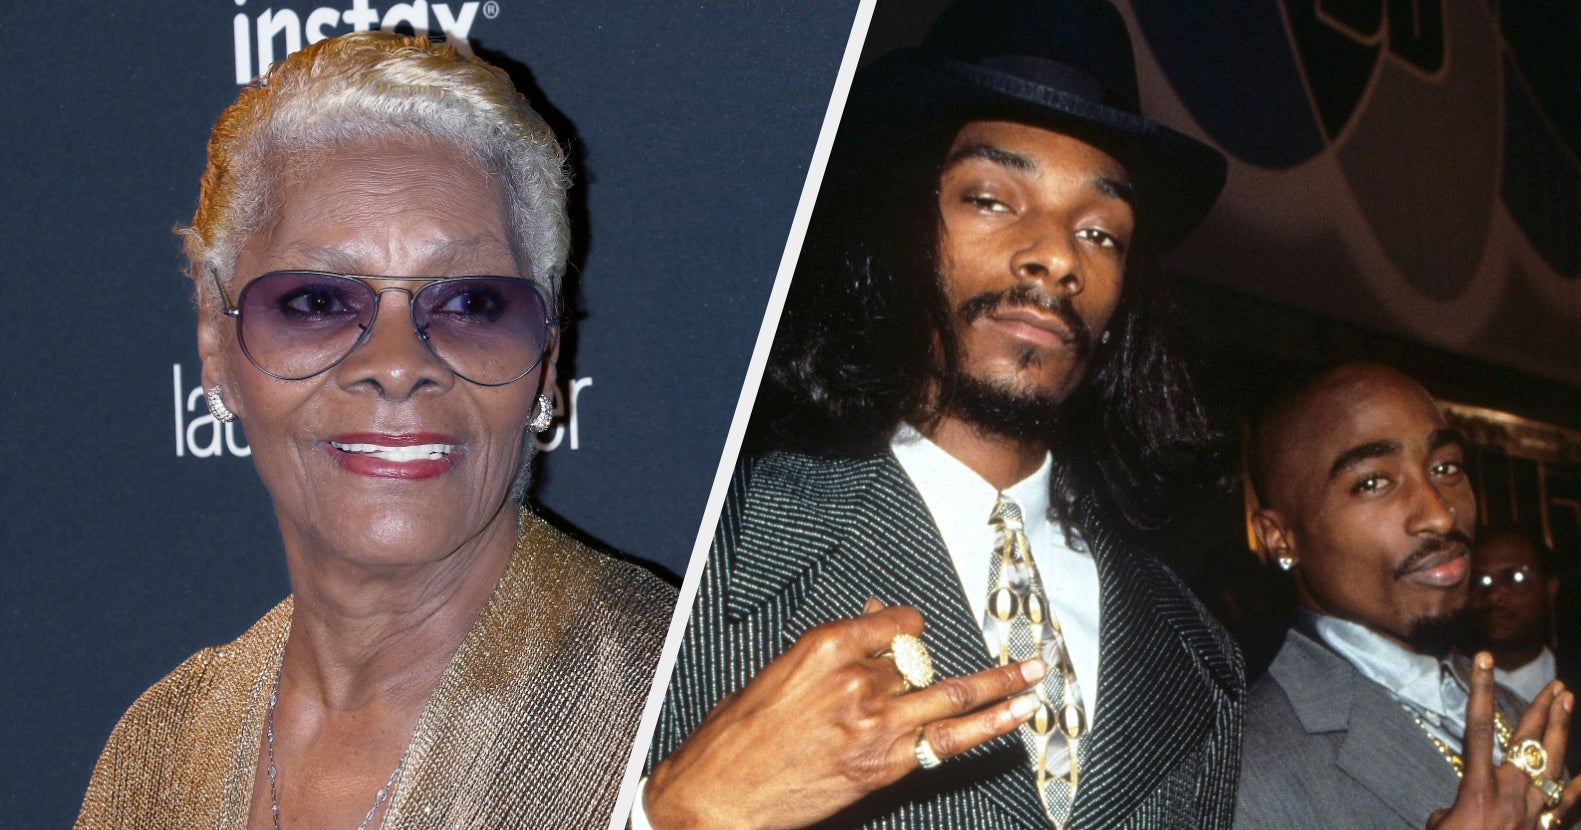 Dionne Warwick Schooled Snoop Dogg And Other Rappers On Misogyny